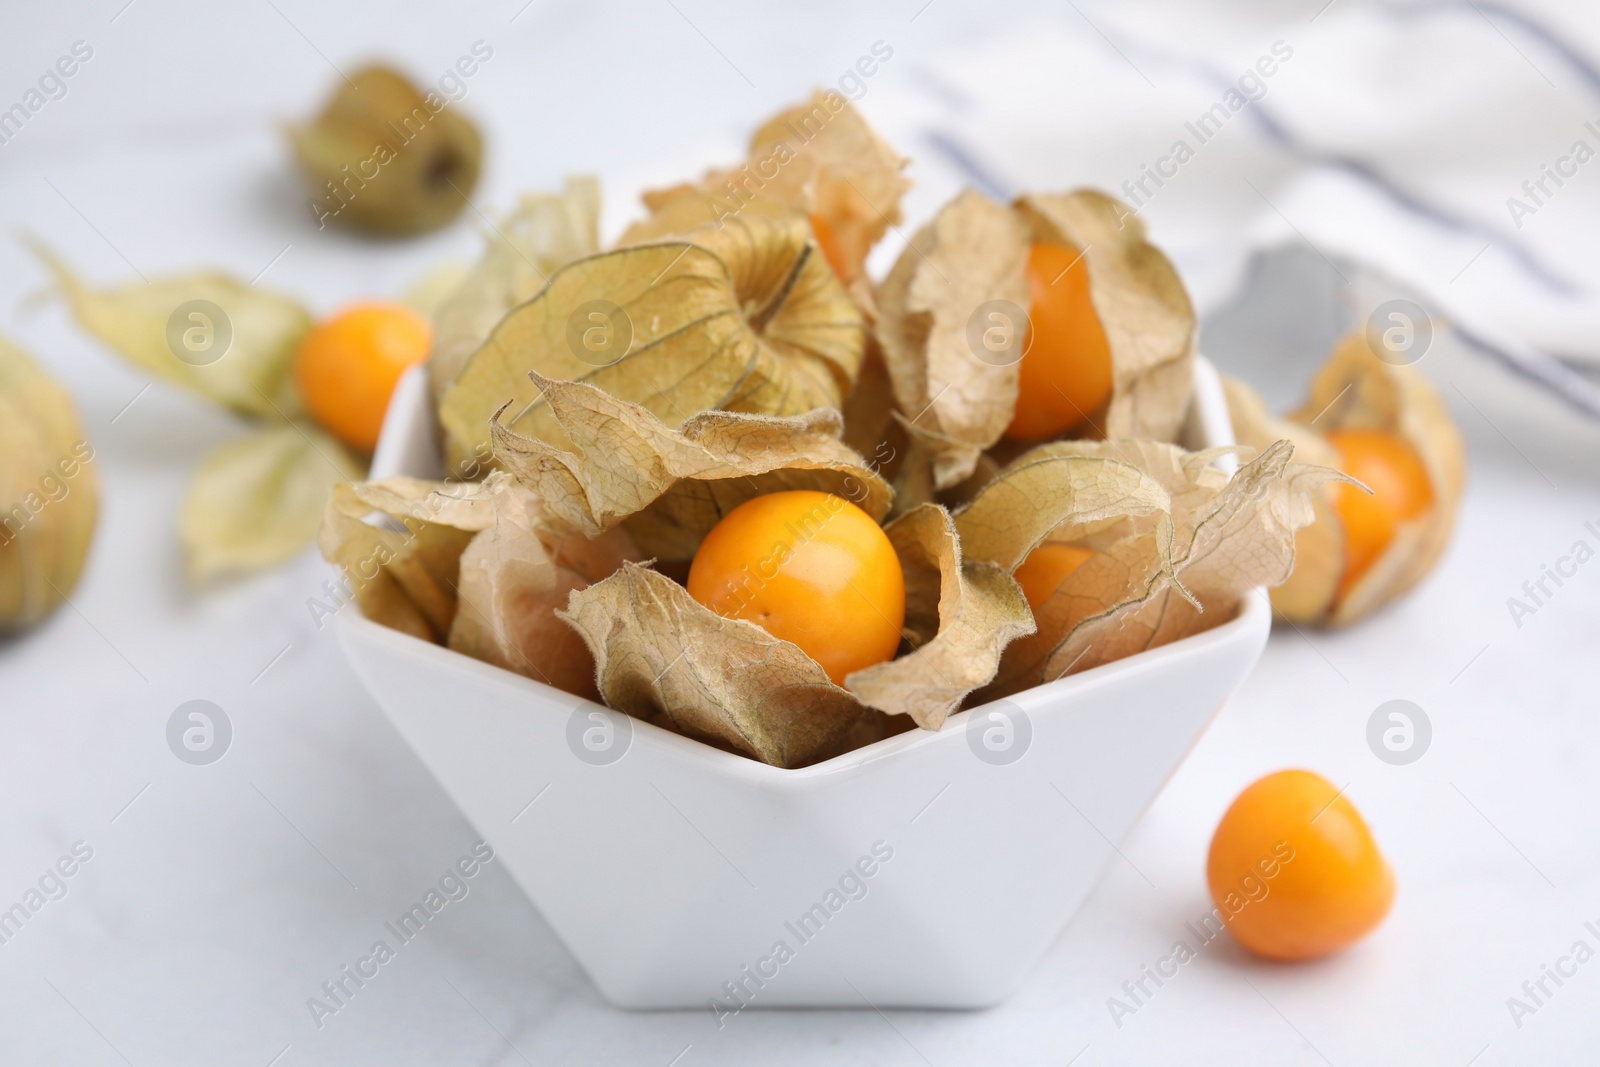 Photo of Ripe physalis fruits with calyxes in bowl on white marble table